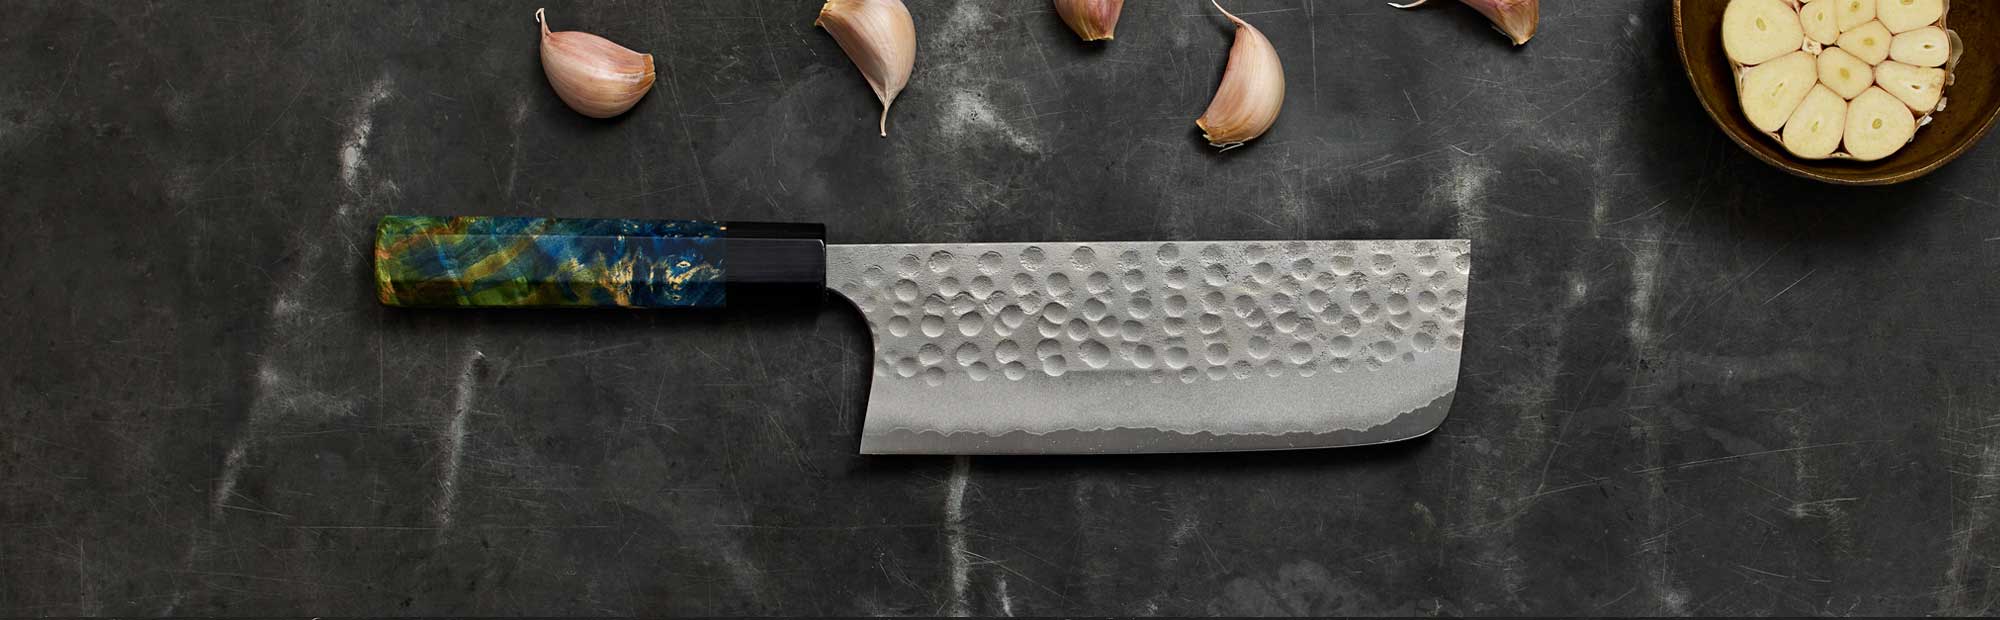 Traditional Japanese Chef Knife